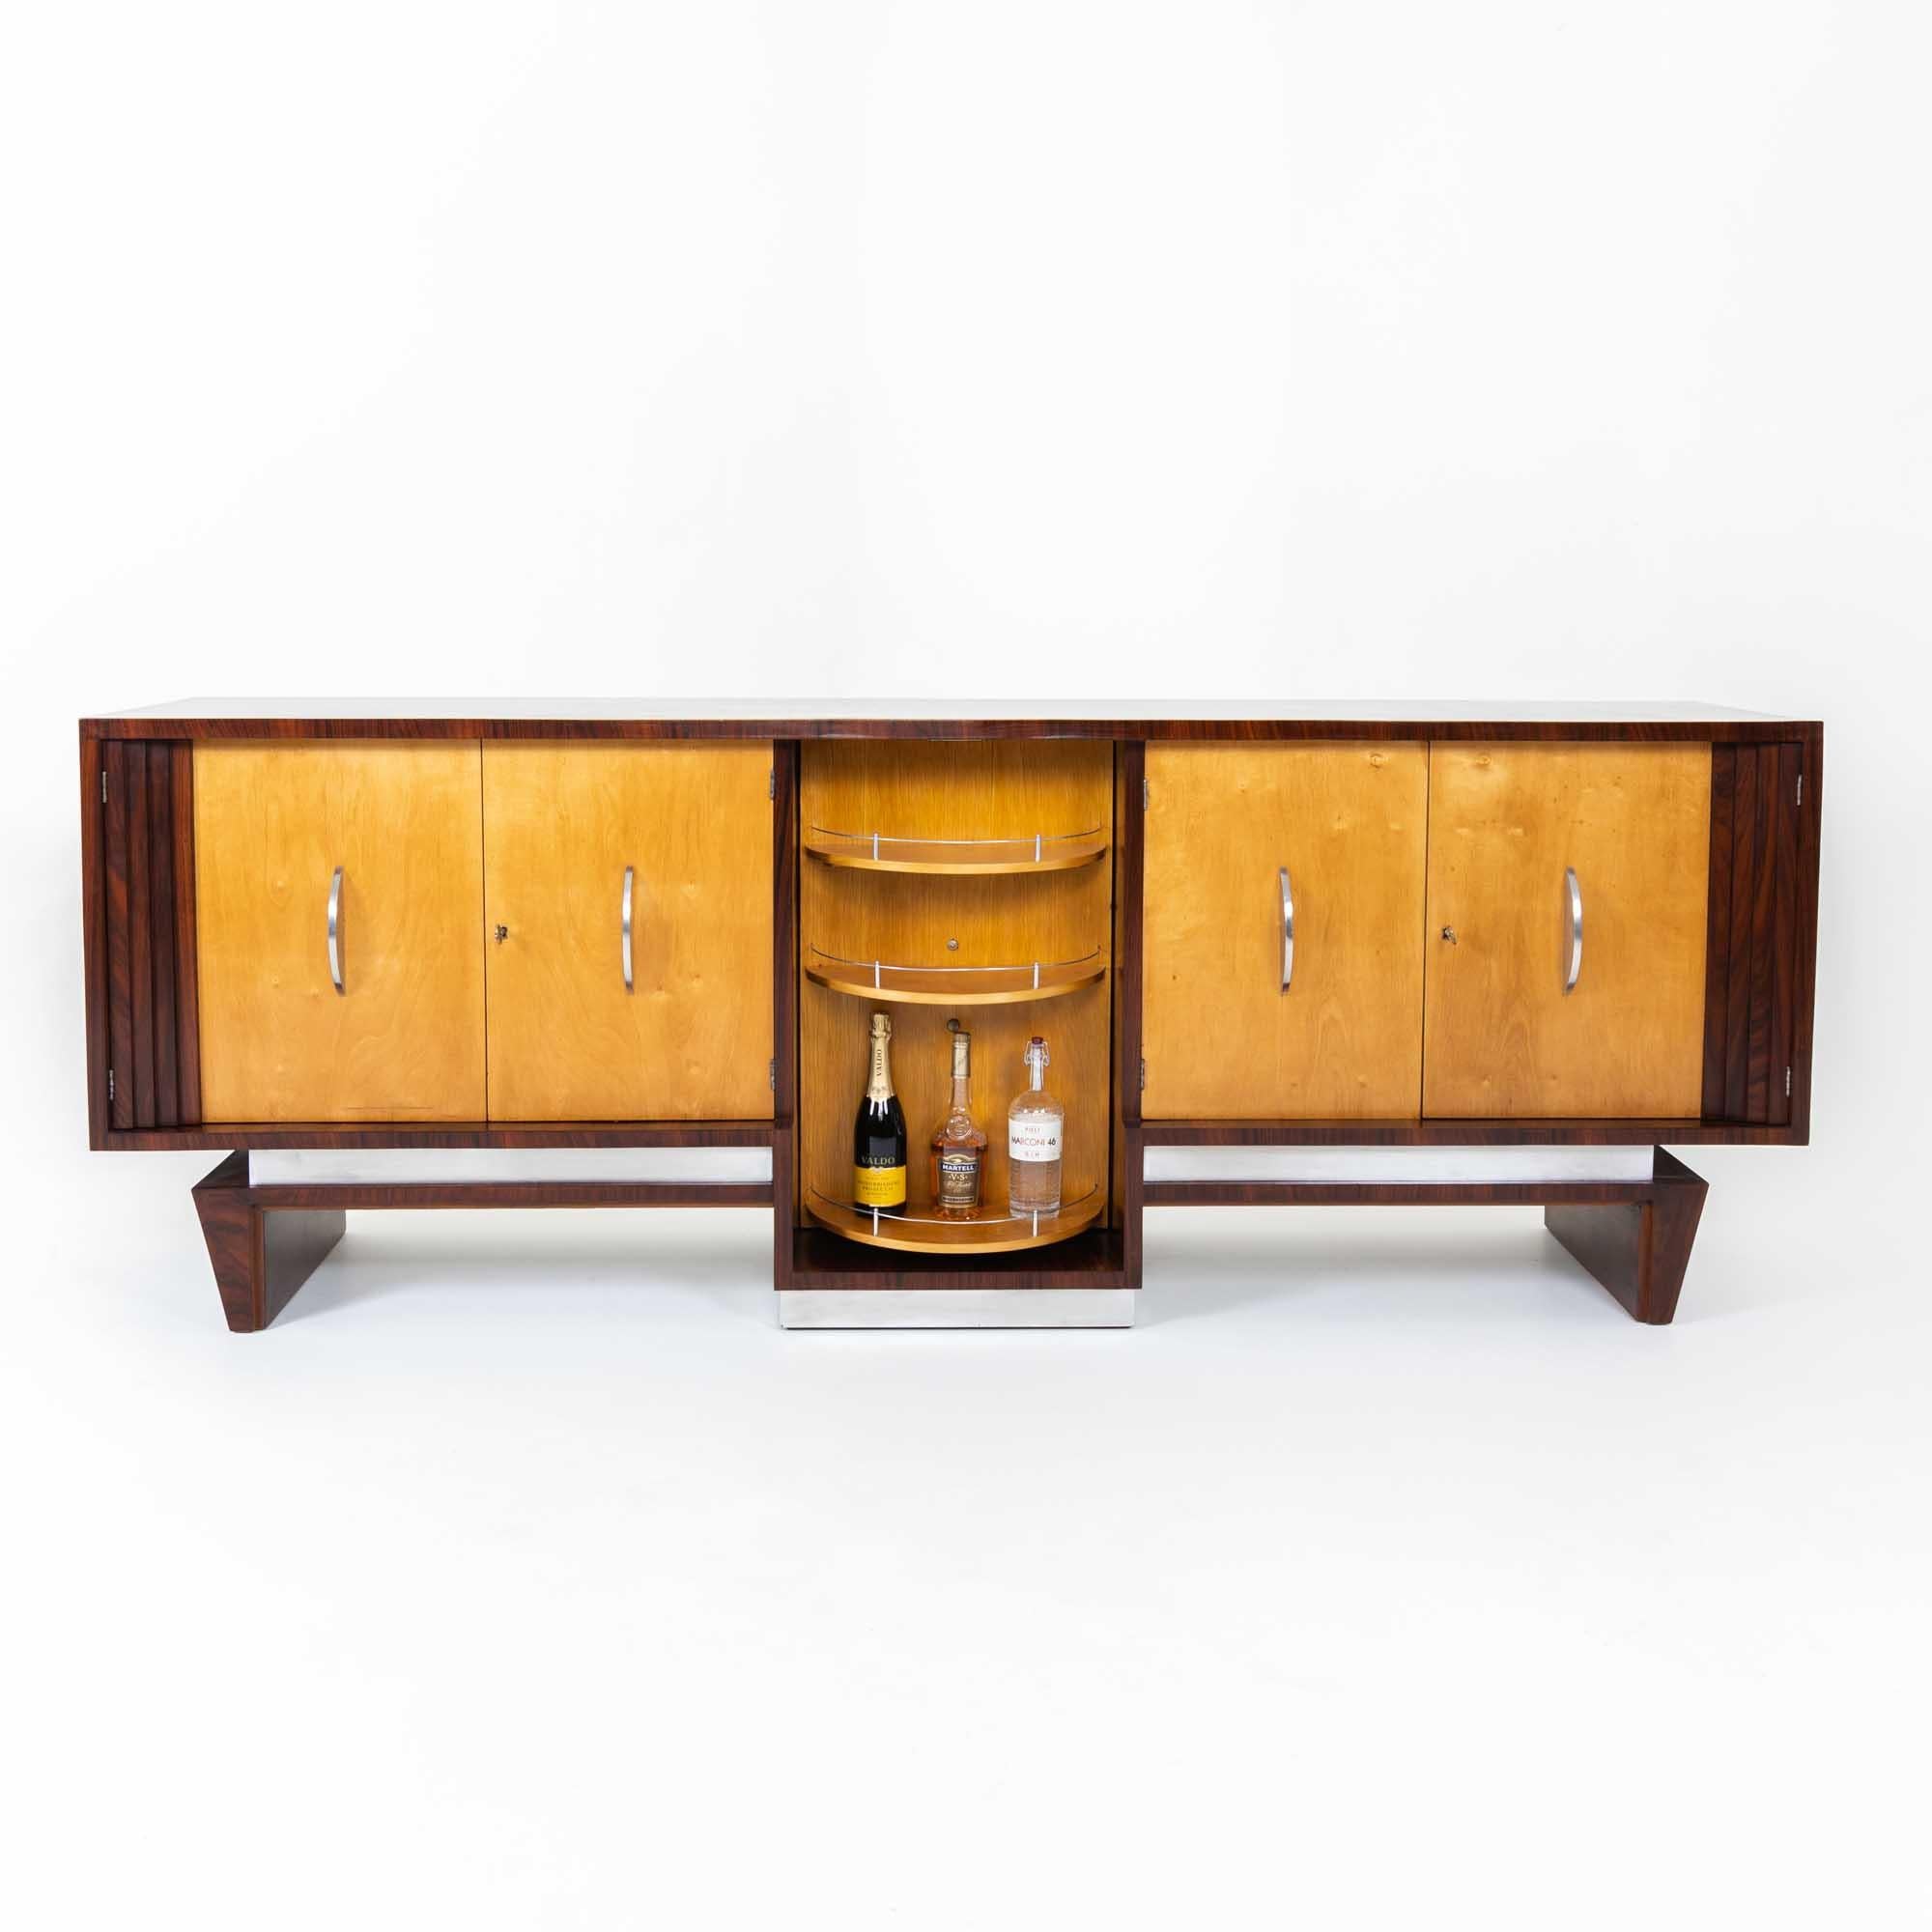 Large four-door sideboard designed by Franco Albini in the 1930s. The Art Deco sideboard is veneered on all sides and fitted with chrome half-moon handles and set off by means of vertical struts at the outer ends and the centre door. The doors are